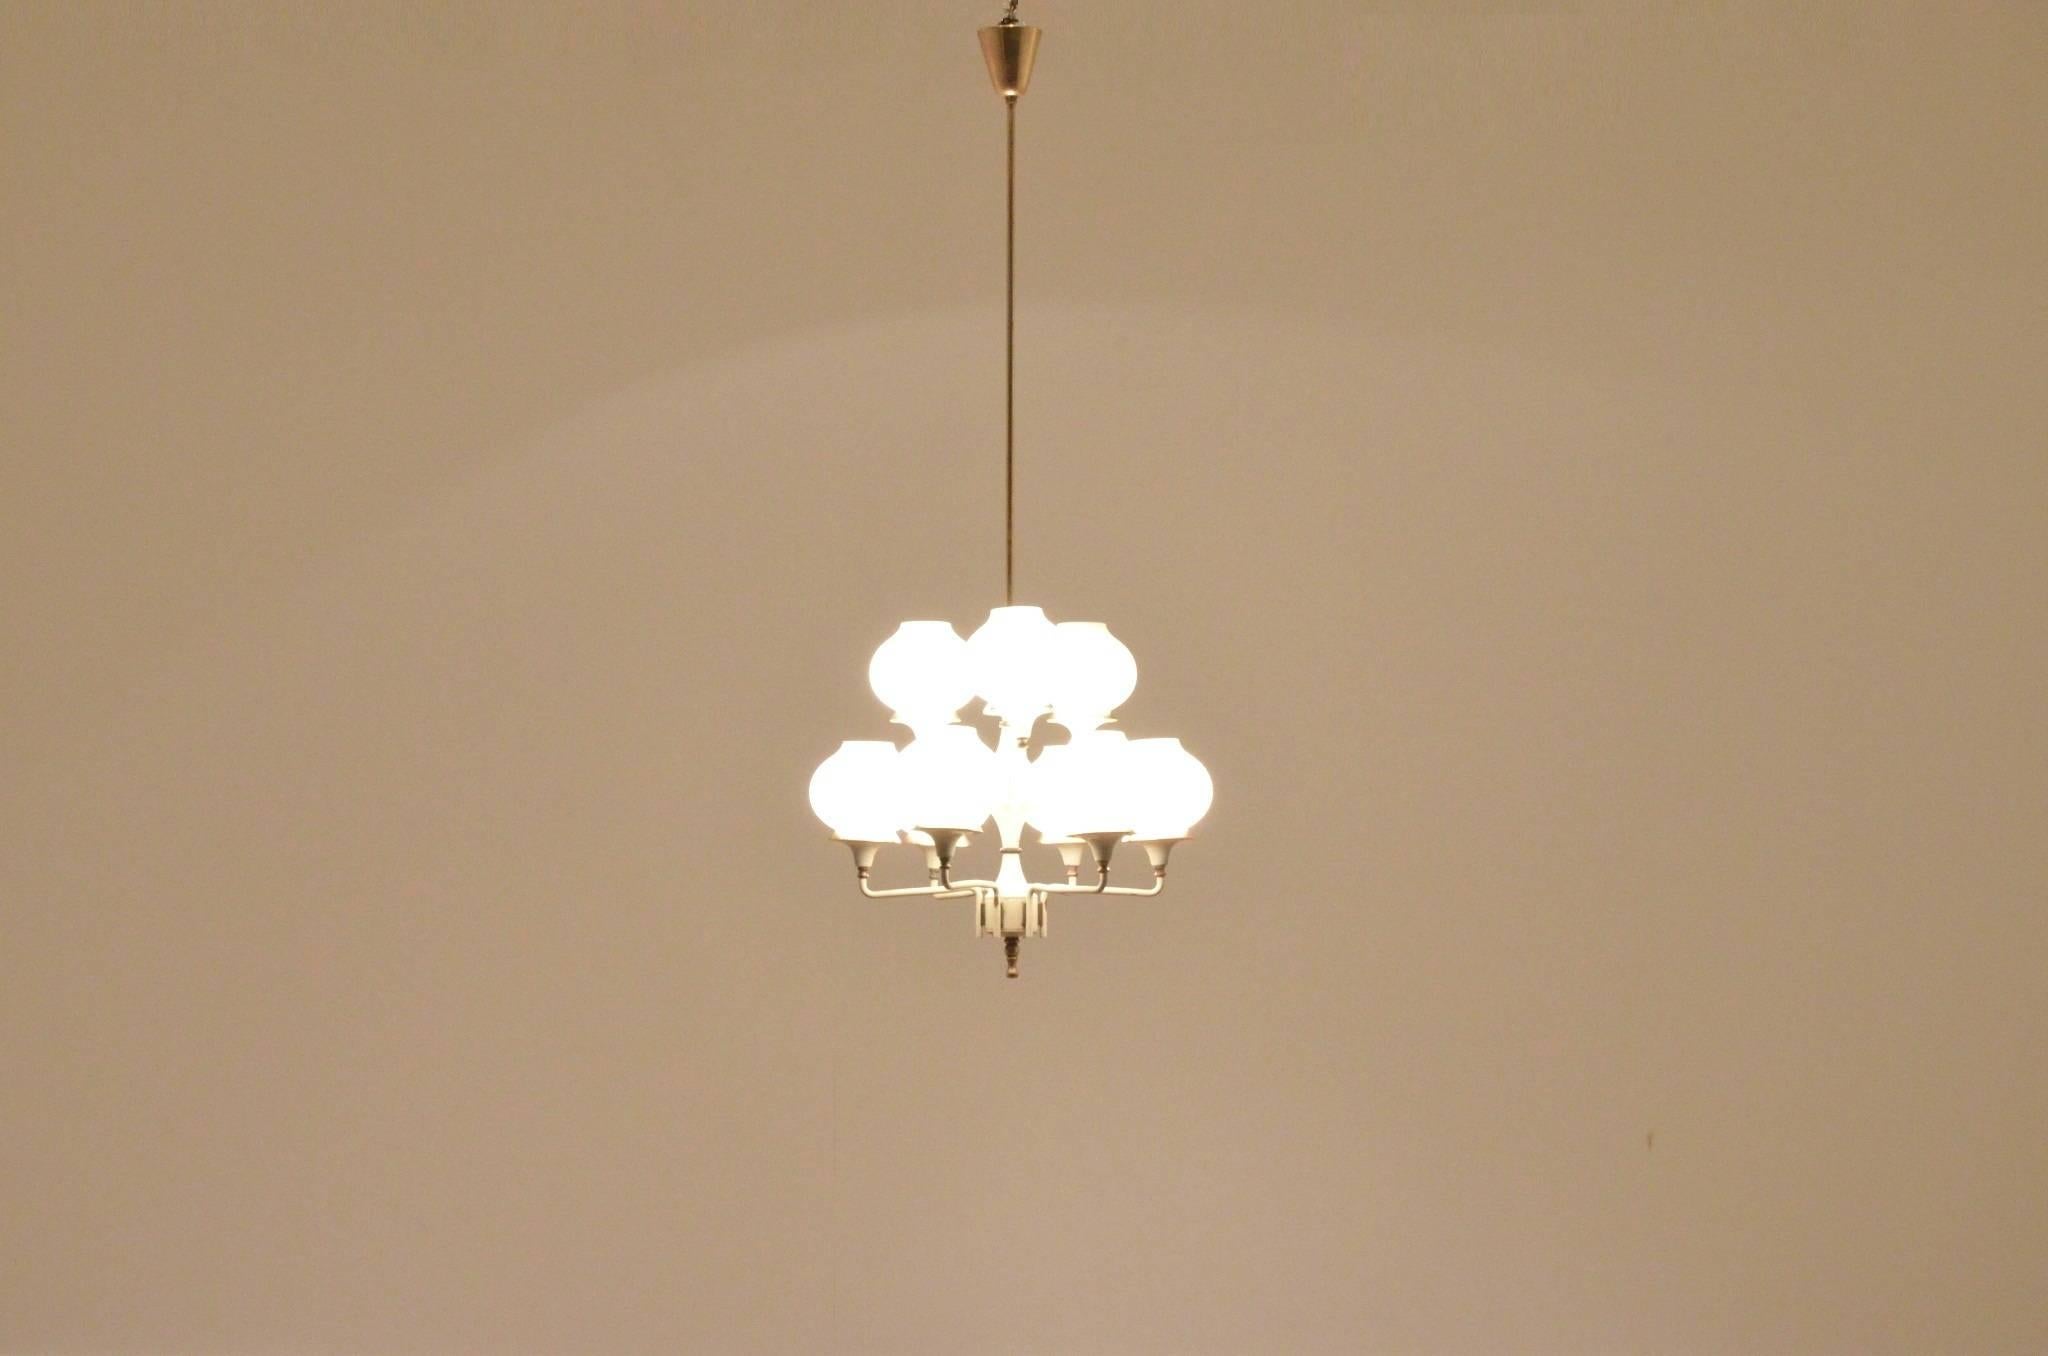 Exquisite midcentury Italian chandelier in the manner of Stilnovo - the structure is composed of two layers of round opalescent glass diffusers matched with brass accents, the main frame is cream / white painted brass.